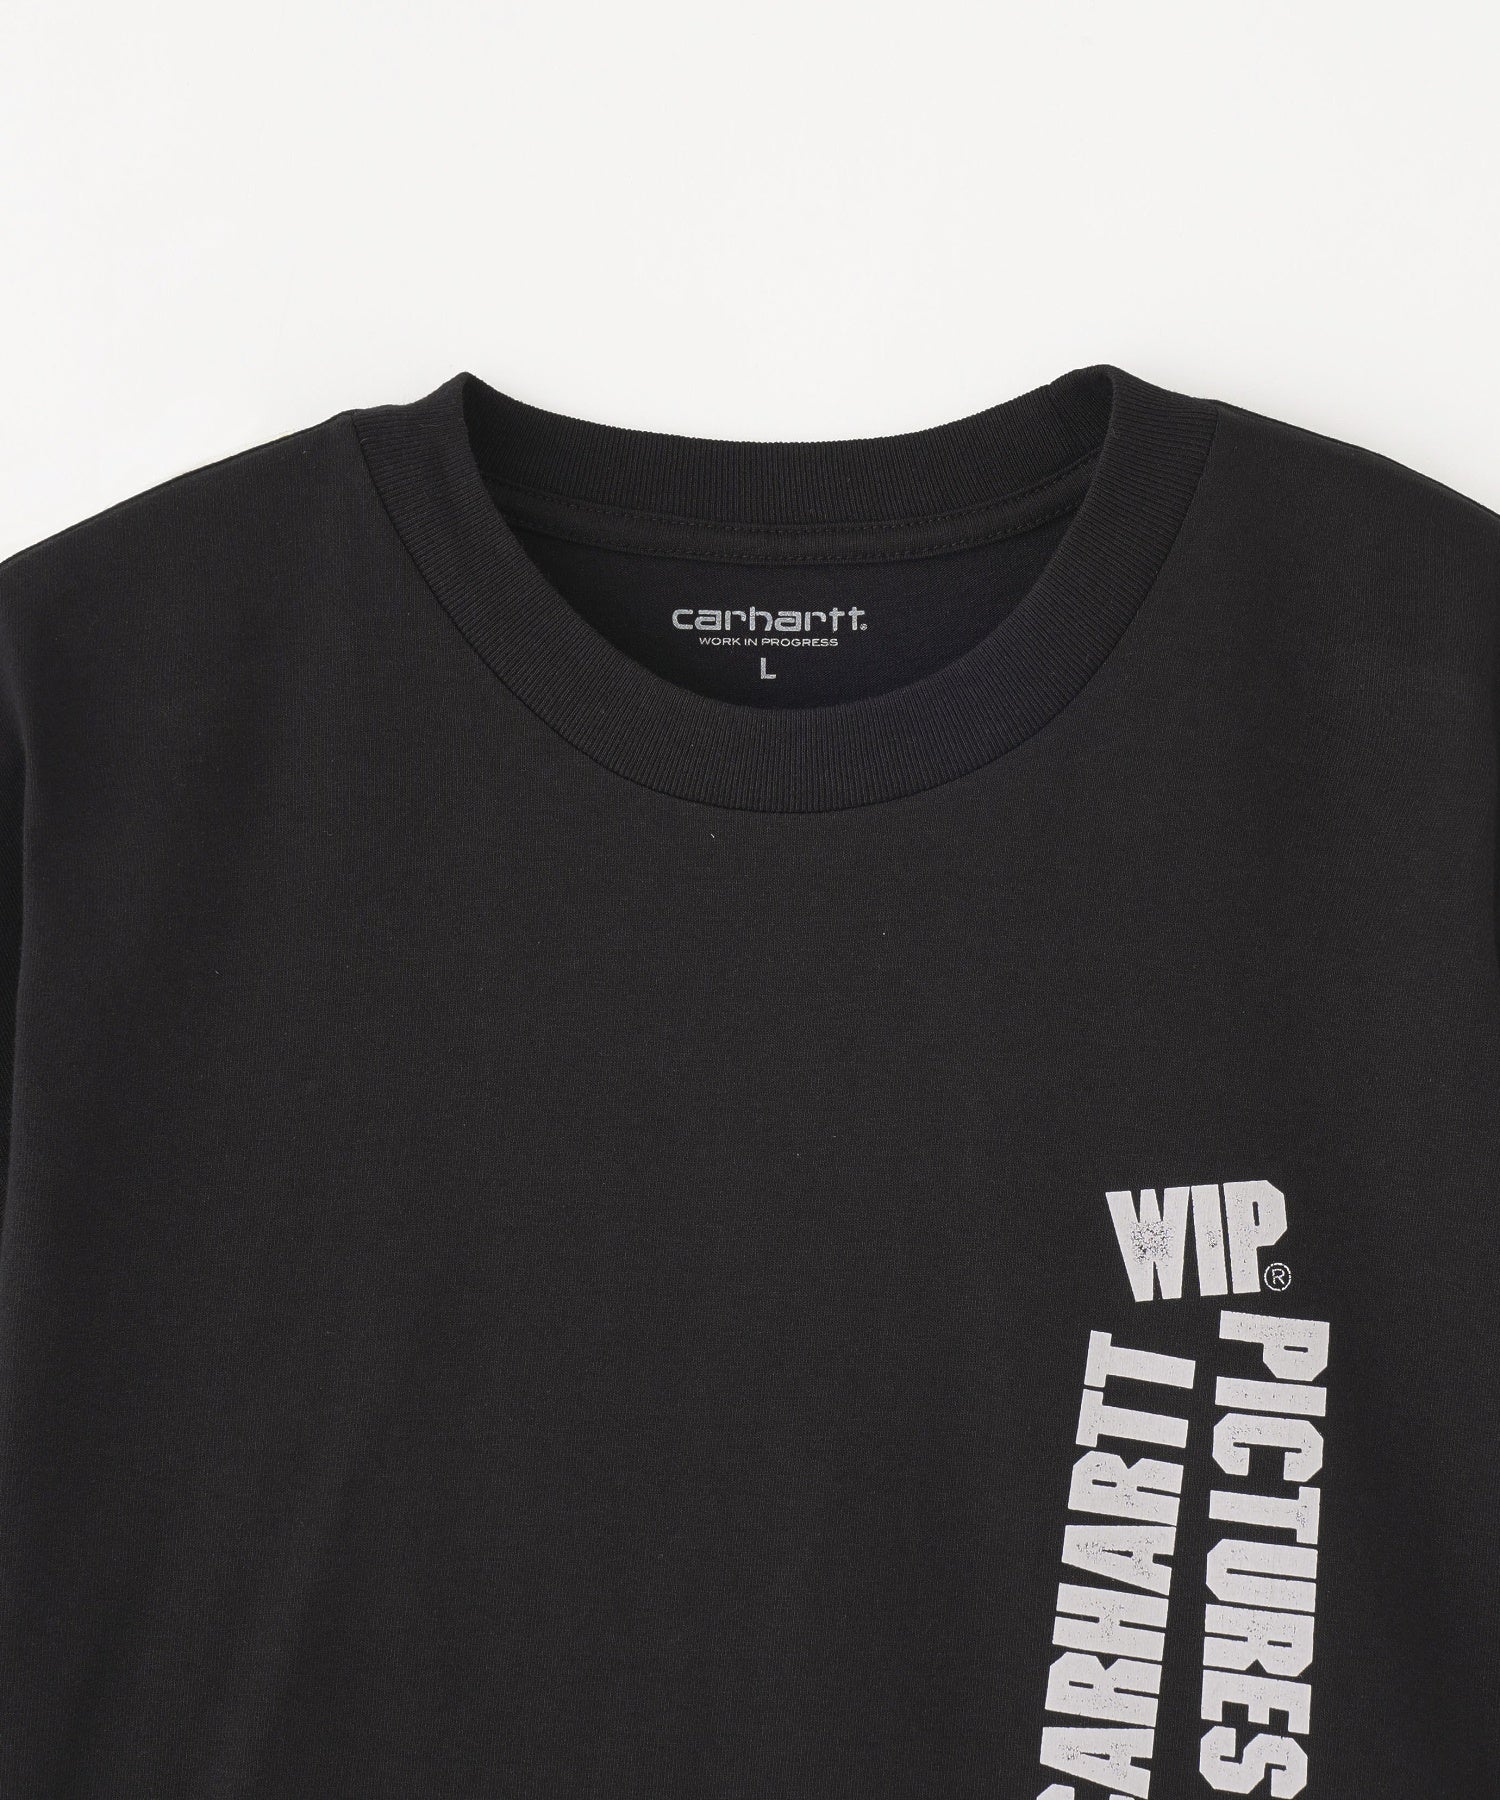 CARHARTT WIP/カーハート/S/S WIP PICTURES T-SHIRT/I033263